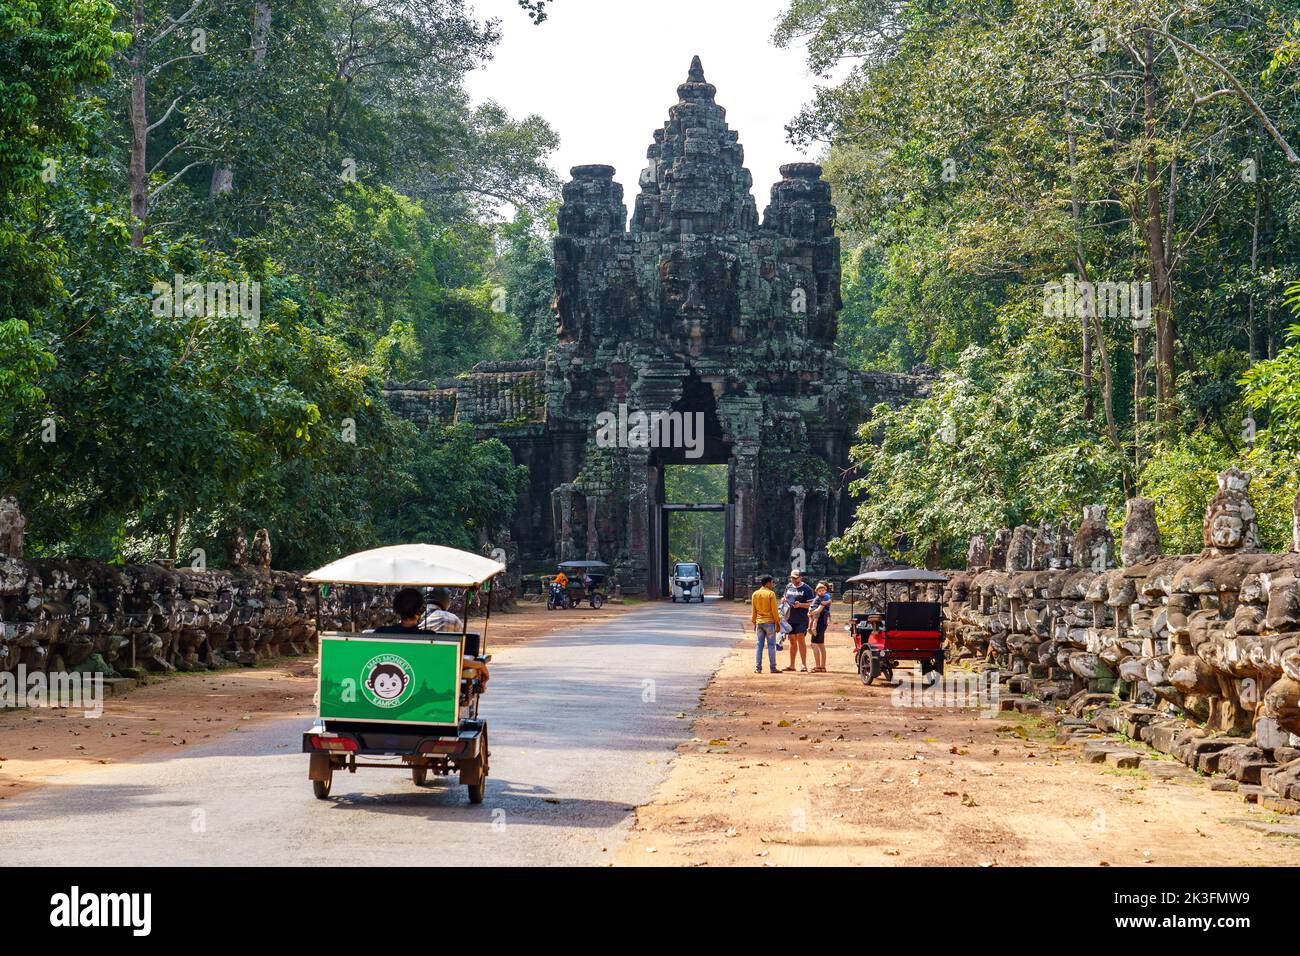 Cambodia. Siem Reap. The archaeological park of Angkor. Tuk tuk taking tourists to Bayon Temple 12th Century Hindu Temple Stock Photo